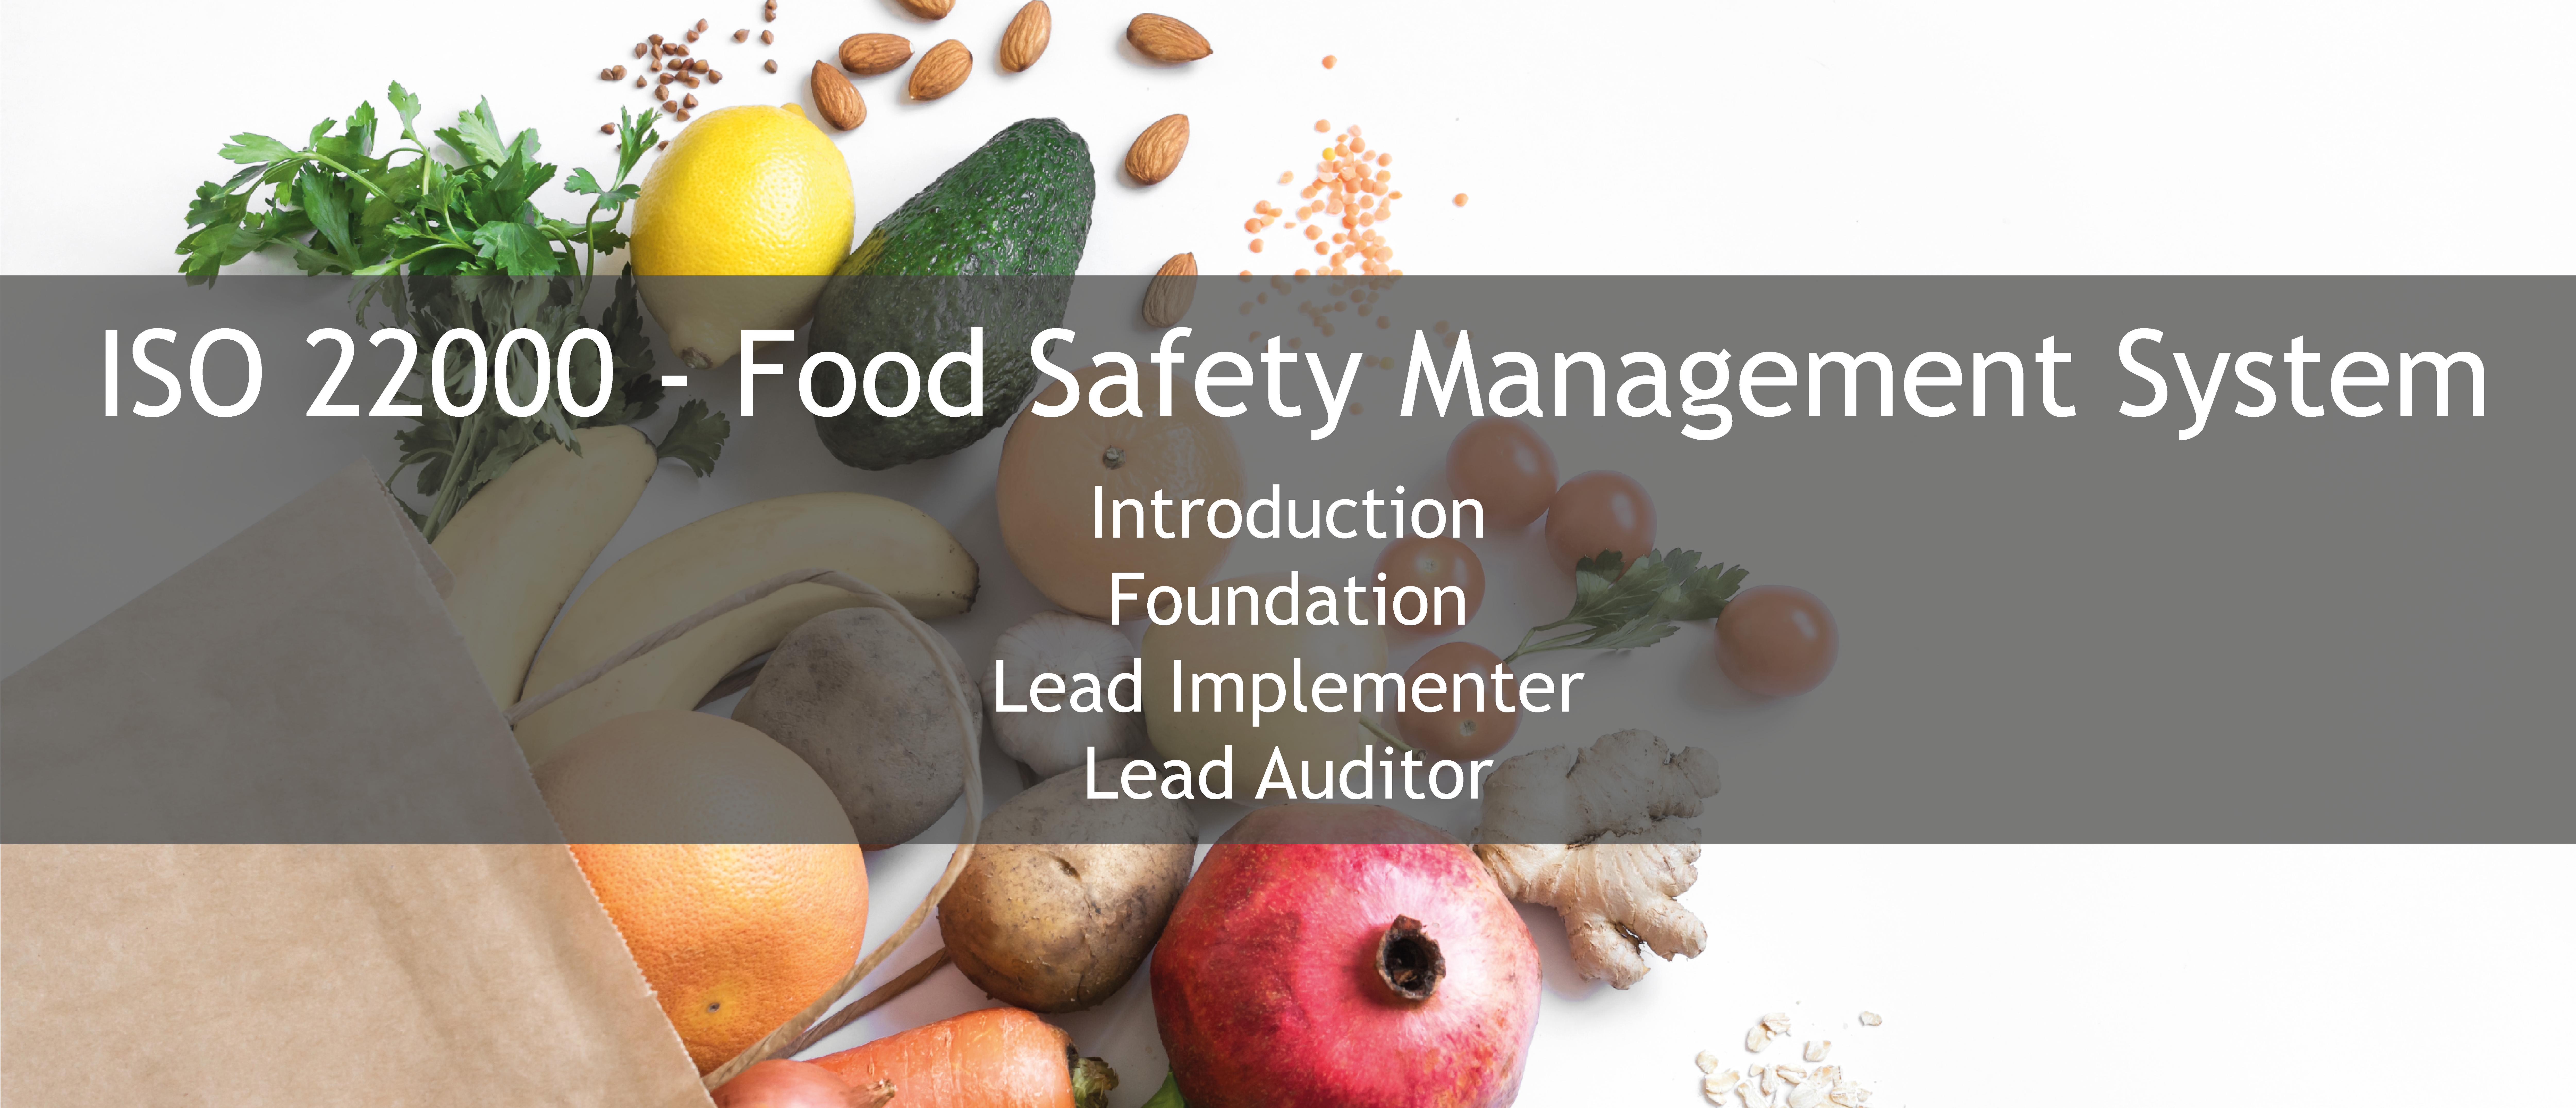 ISO 22000 training offer - ISO 22000 - Food Safety Management System